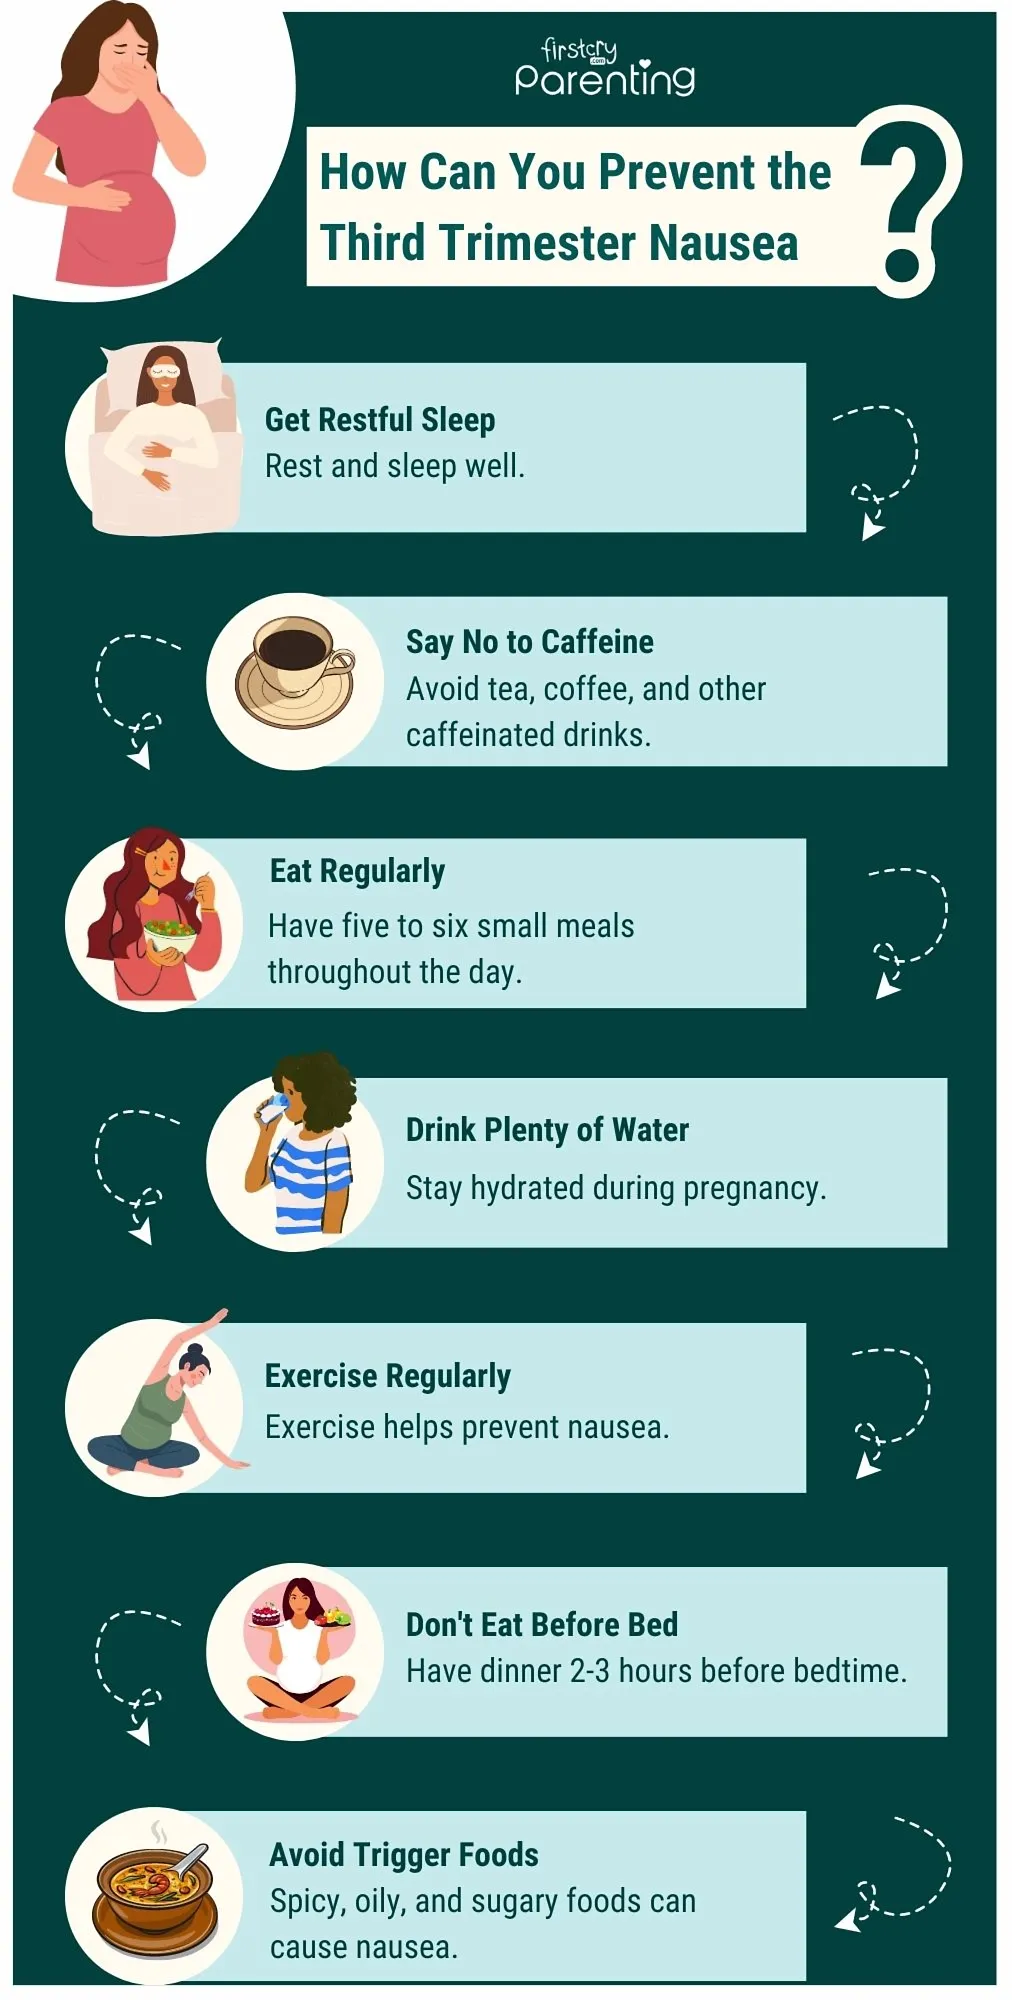 How Can You Prevent the Third Trimester Nausea - Infographic